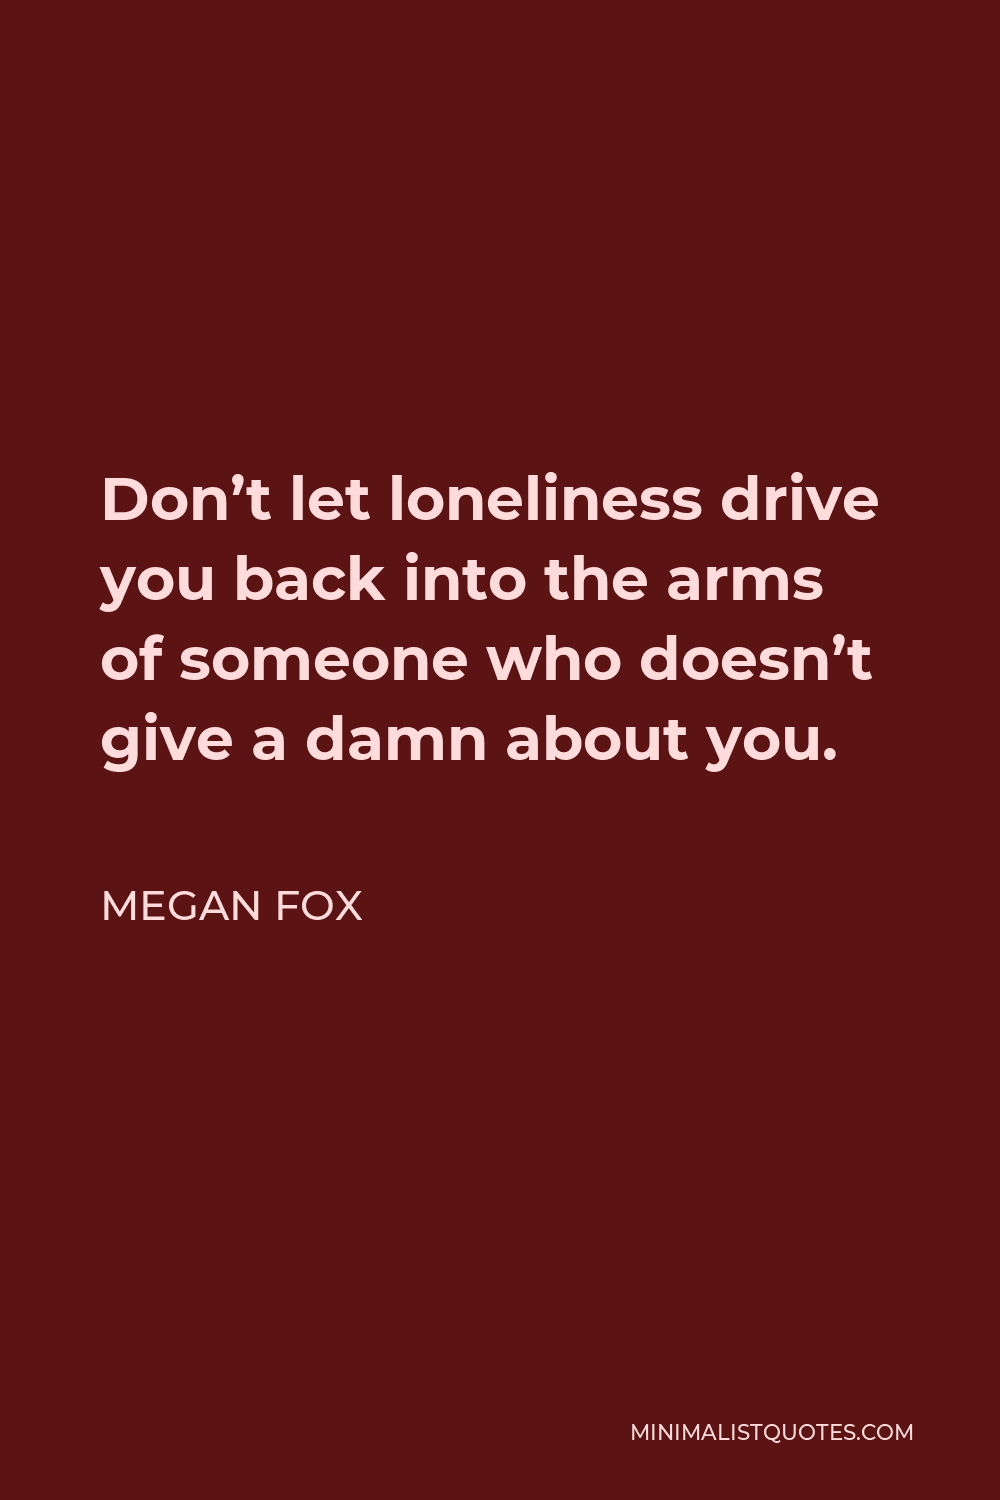 Megan Fox Quote - Don’t let loneliness drive you back into the arms of someone who doesn’t give a damn about you.